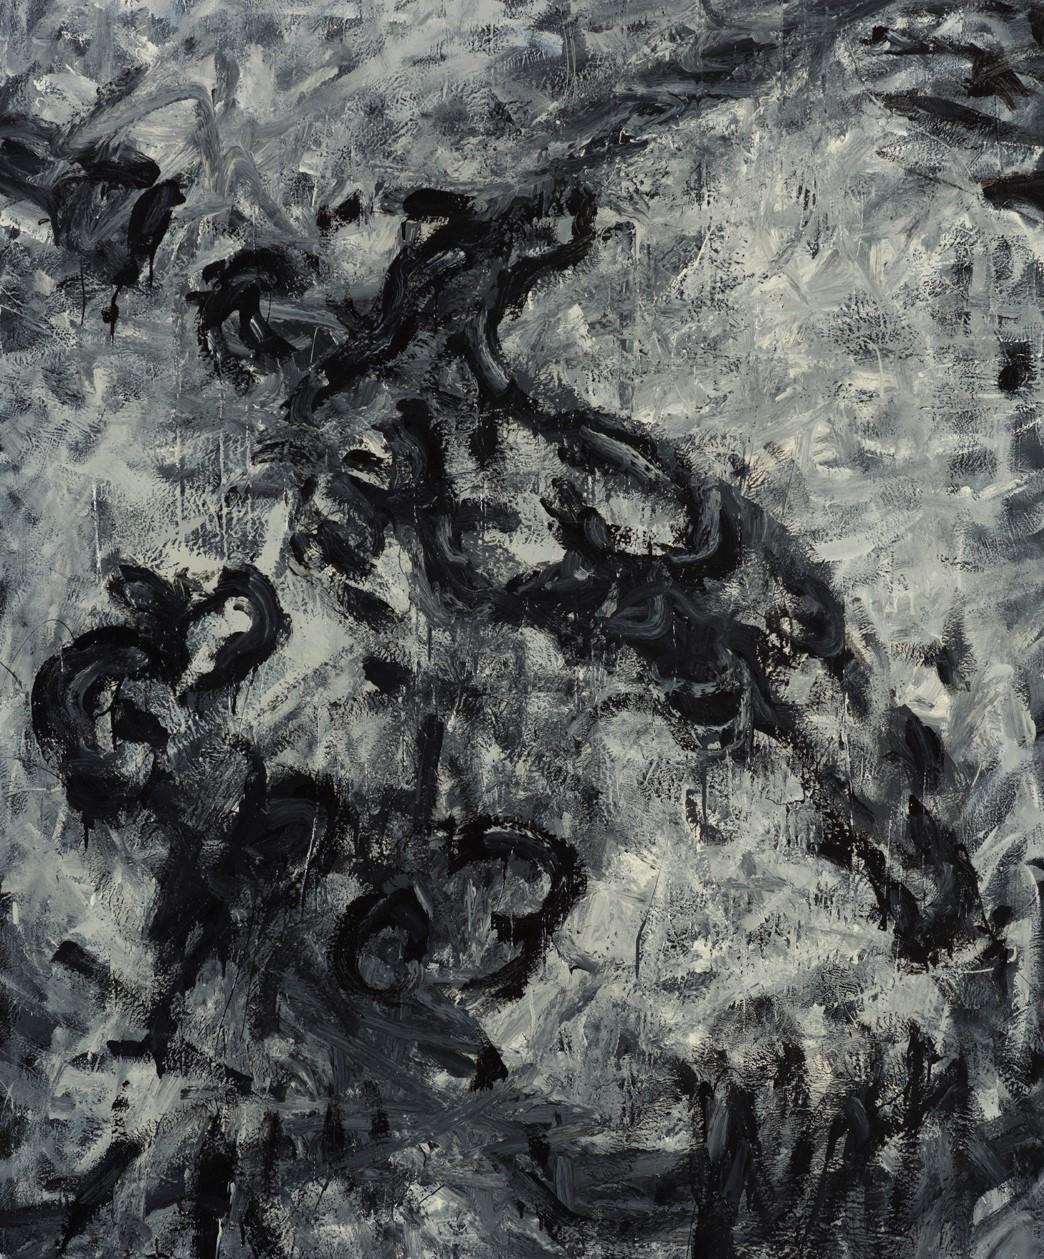 Untitled 09 [Remains of the Remains 09] - Contemporary, Abstract, Black, Grey - Painting by Zsolt Berszán